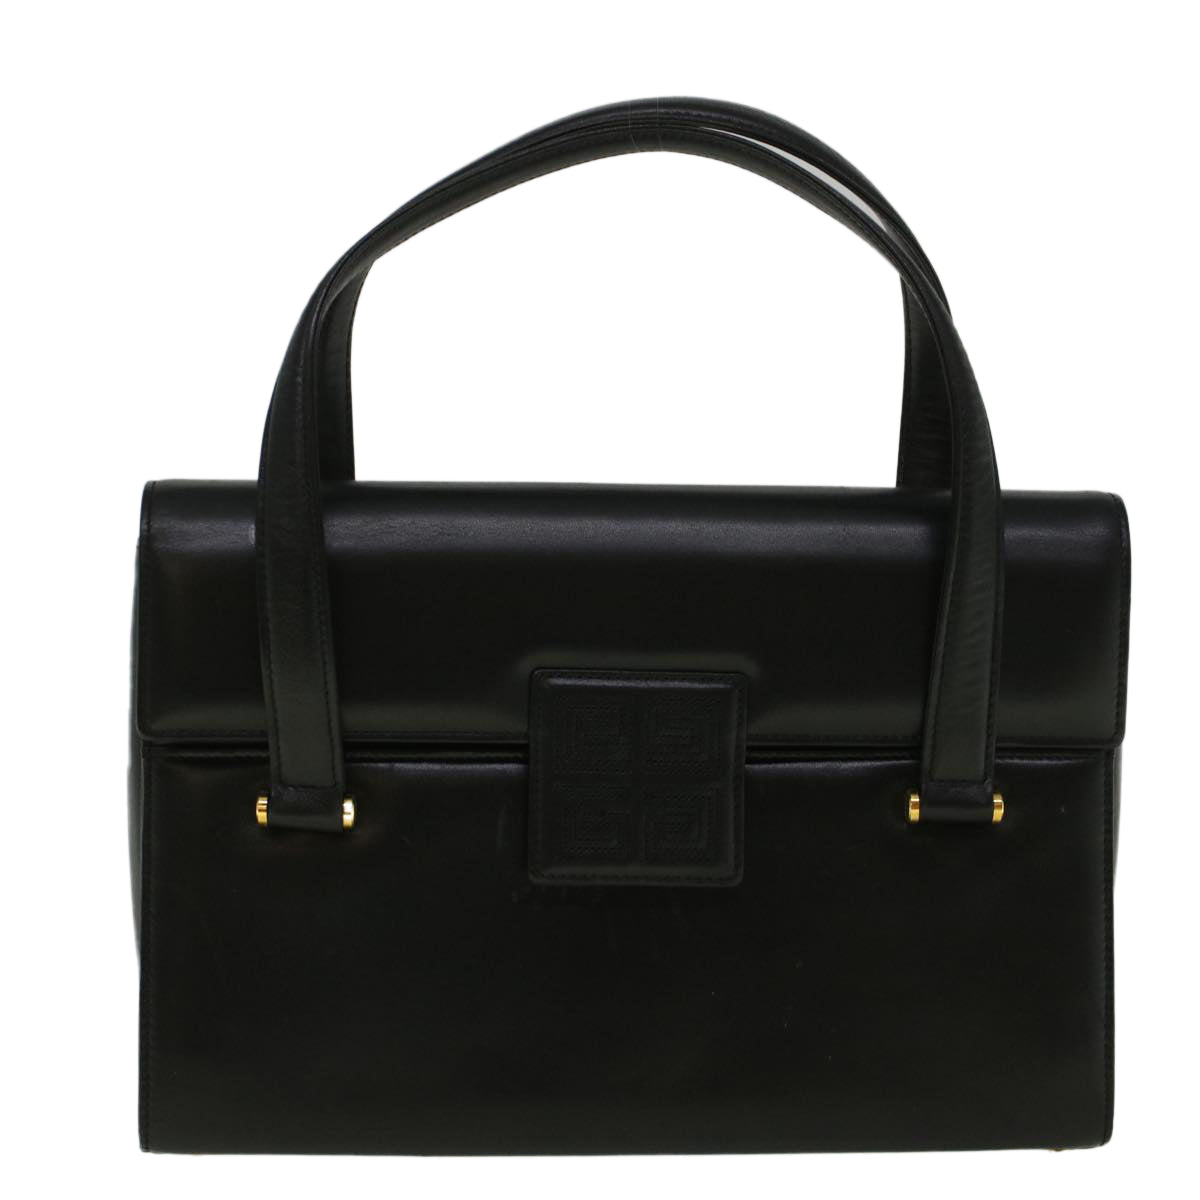 Givenchy Hand Bag Leather Black Auth Bs9526